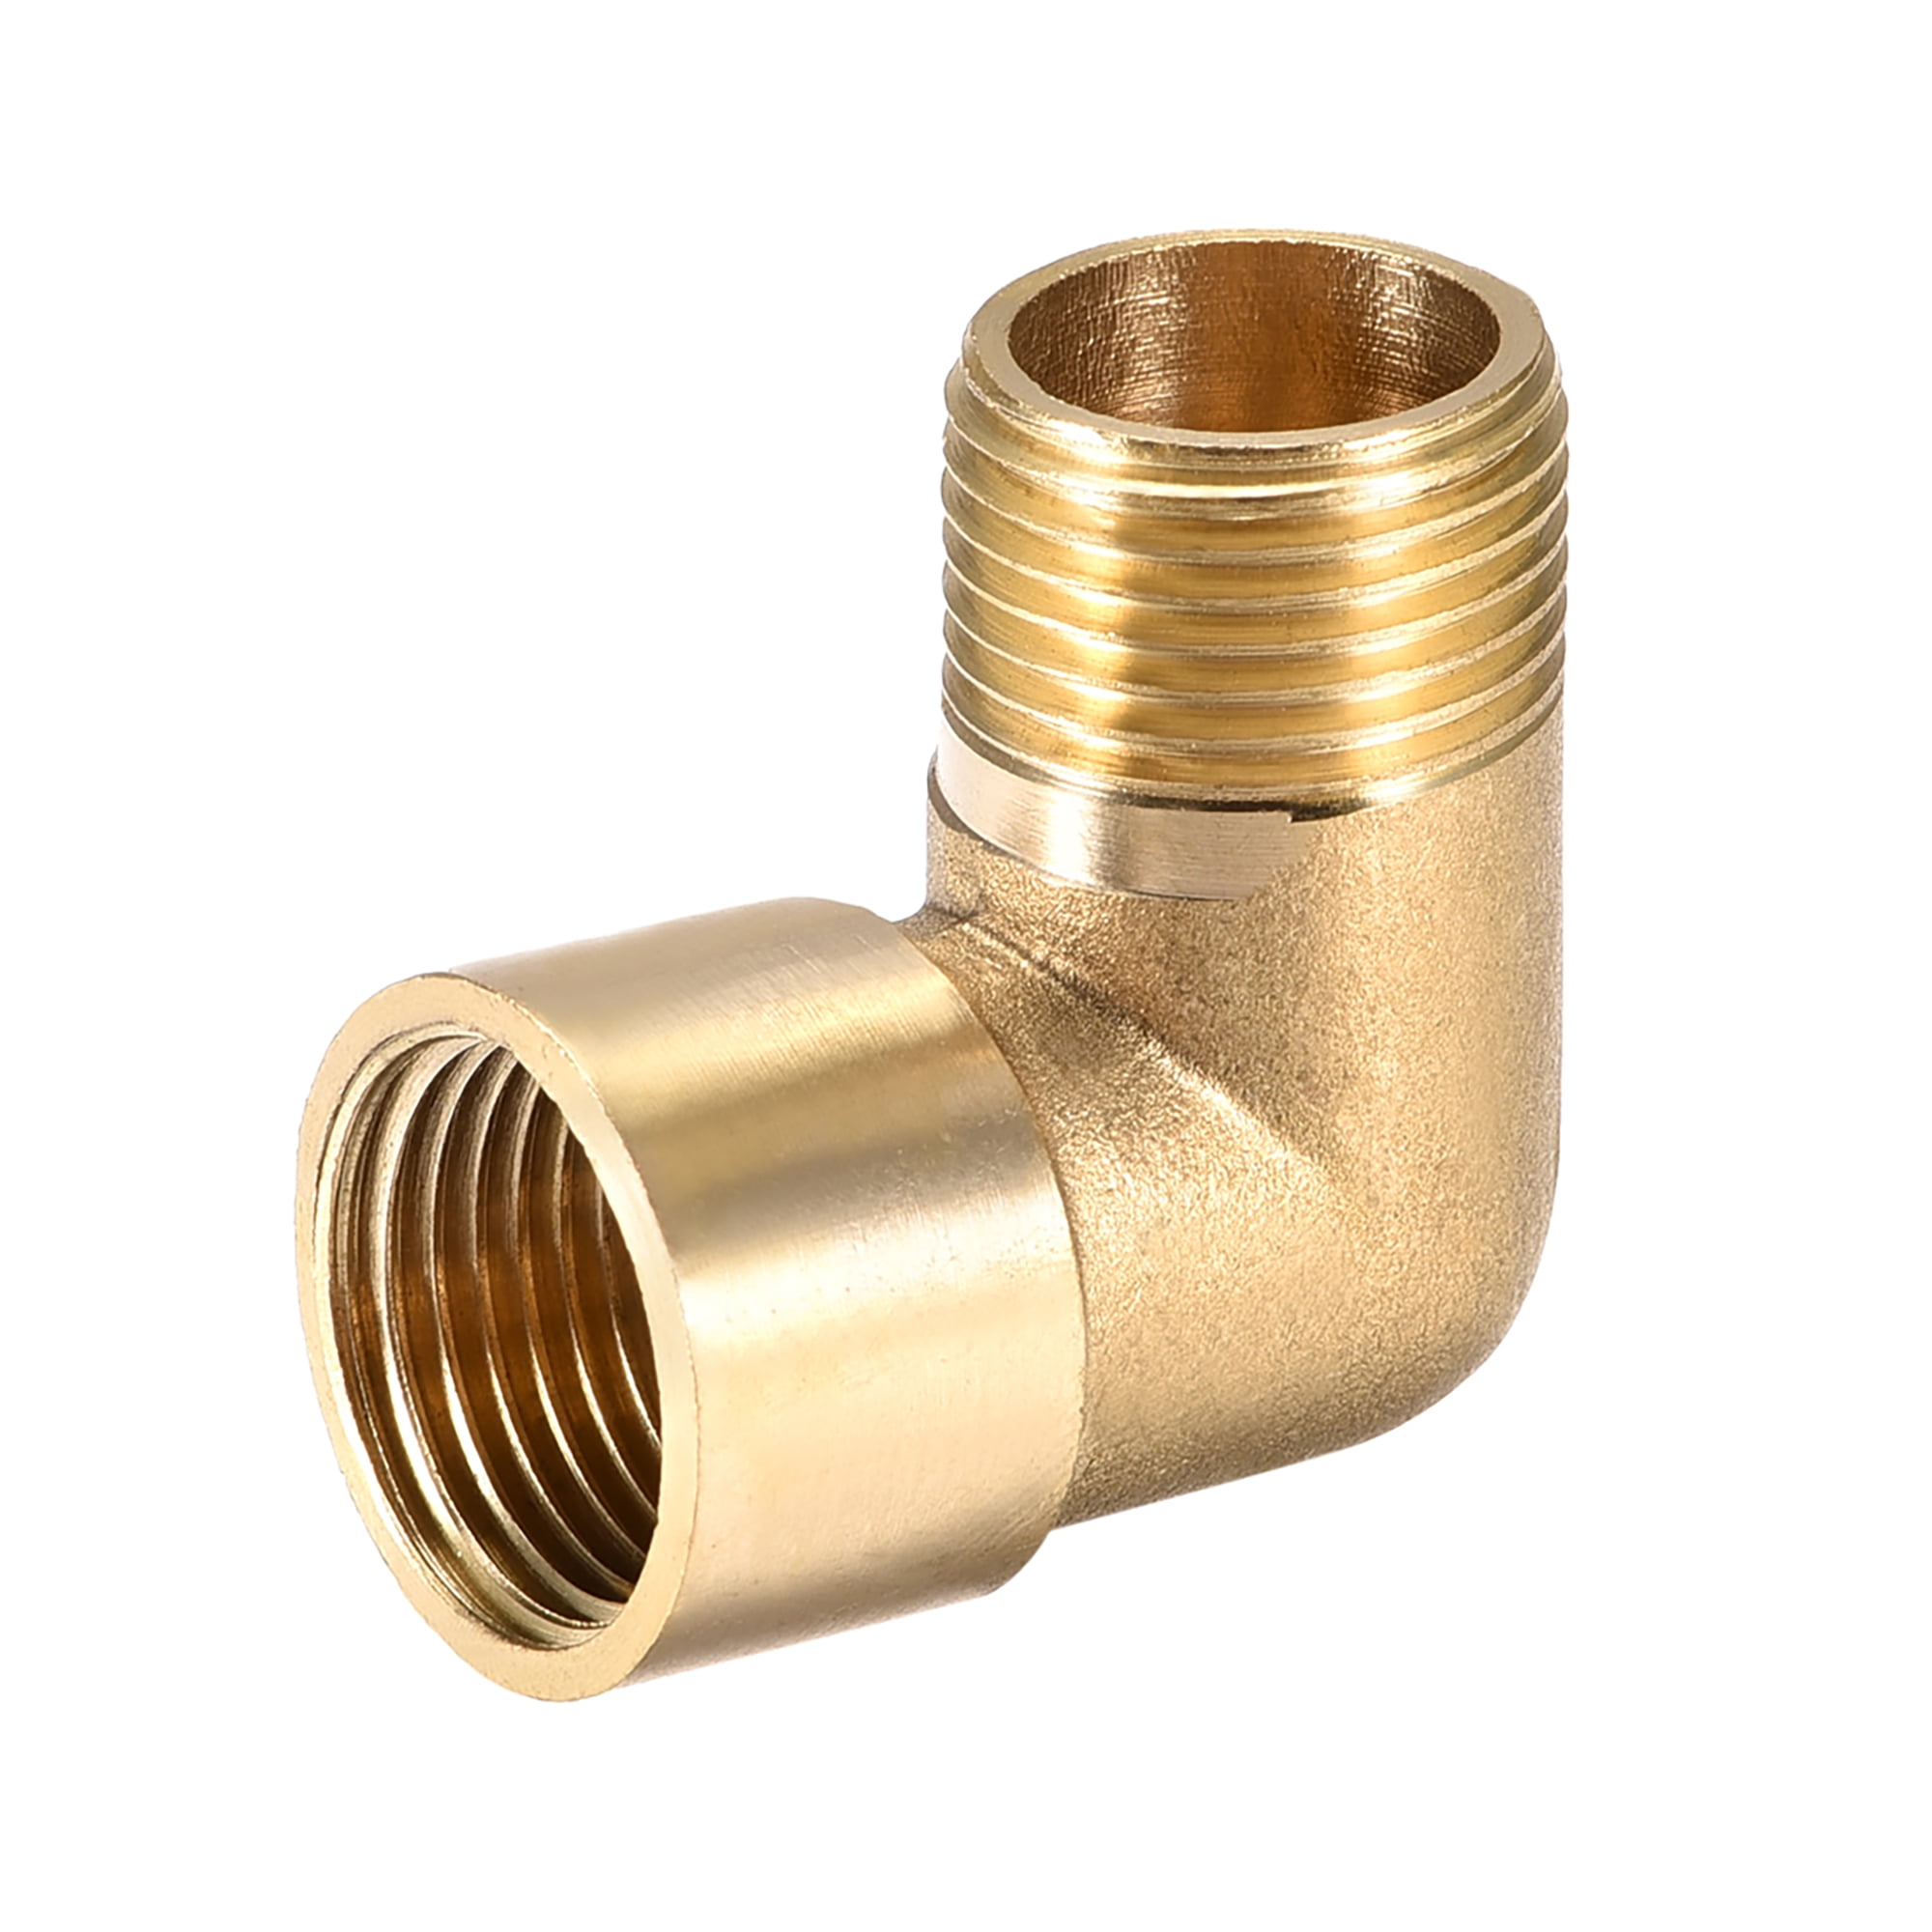 Uxcell Barb Hose Fitting Brass 90 Degree Elbow G3 8 Male X G3 8 Female